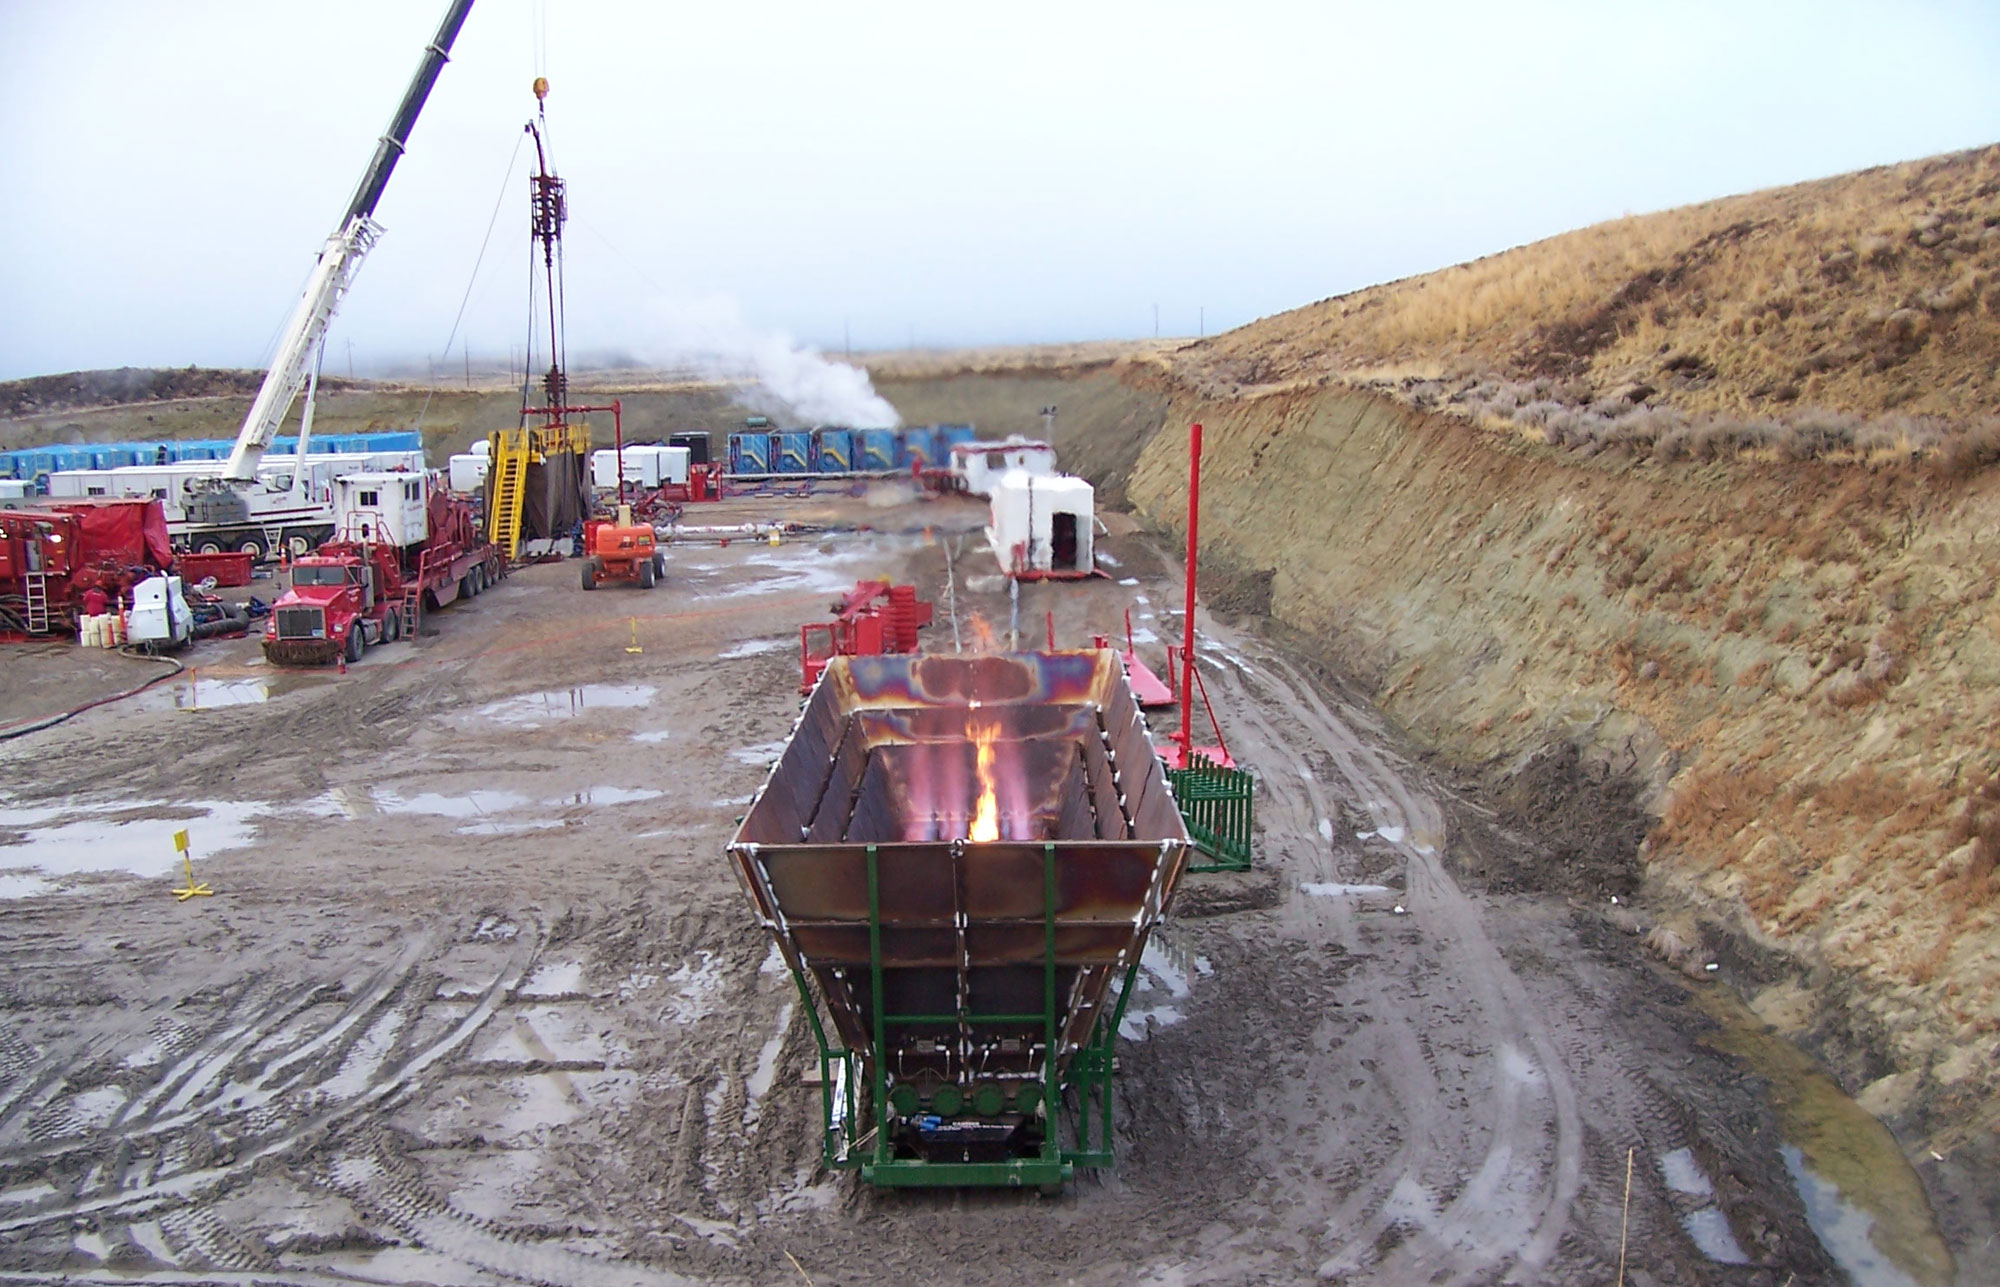 Photograph of an excavated area in the Pinedale Anticline Natural Gas Field. An enclosed gas flare is in the foreground. It looks like a metal container with a flame inside. In the background, vehicles and other equipment are visible.